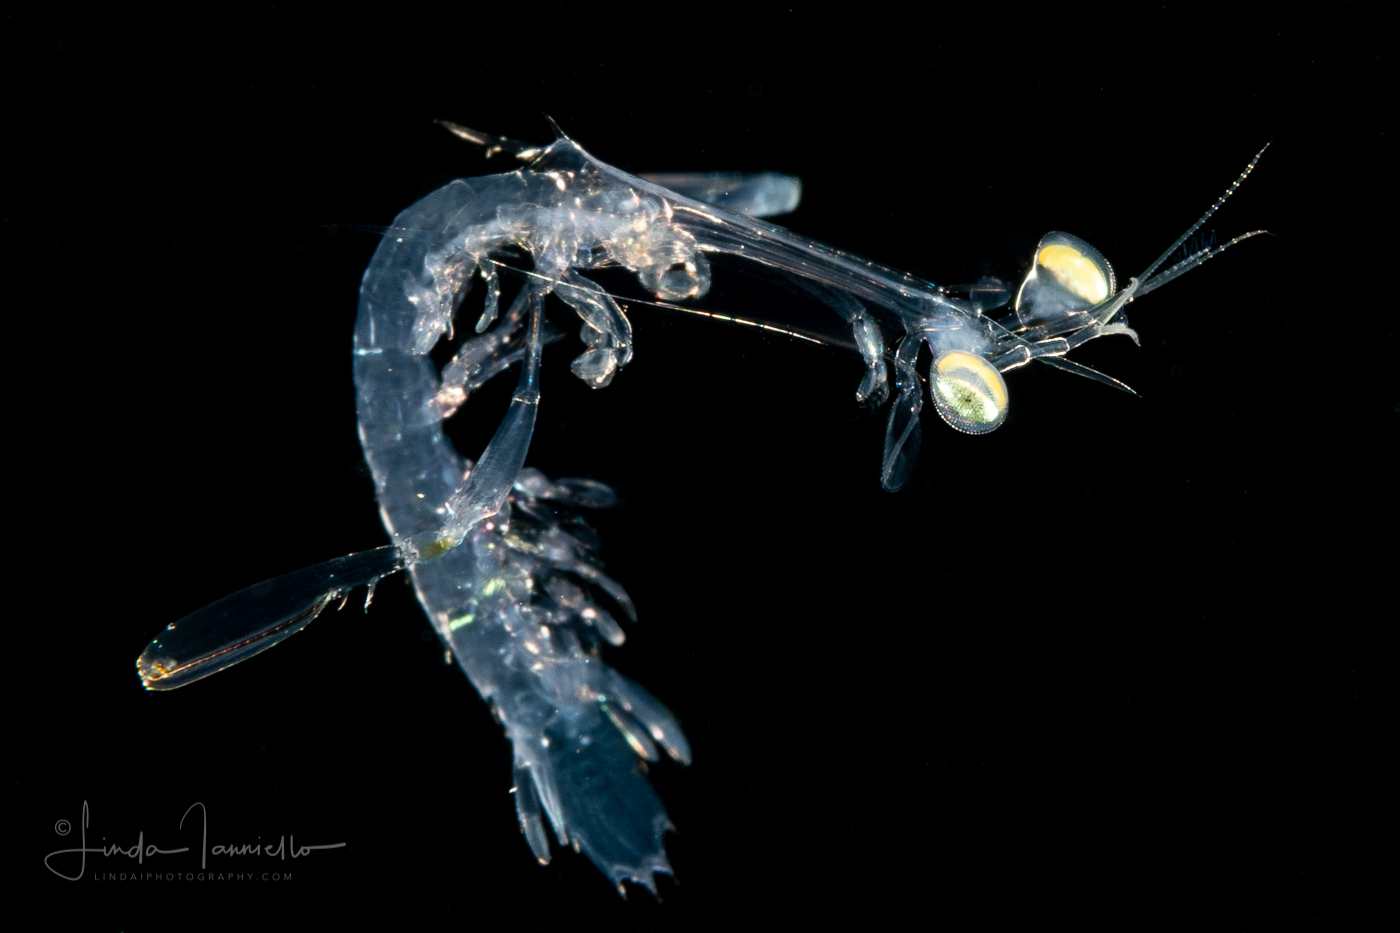 Mantis Shrimp - With a Very Long Neck - Alima Stage Larva of a Squillidae